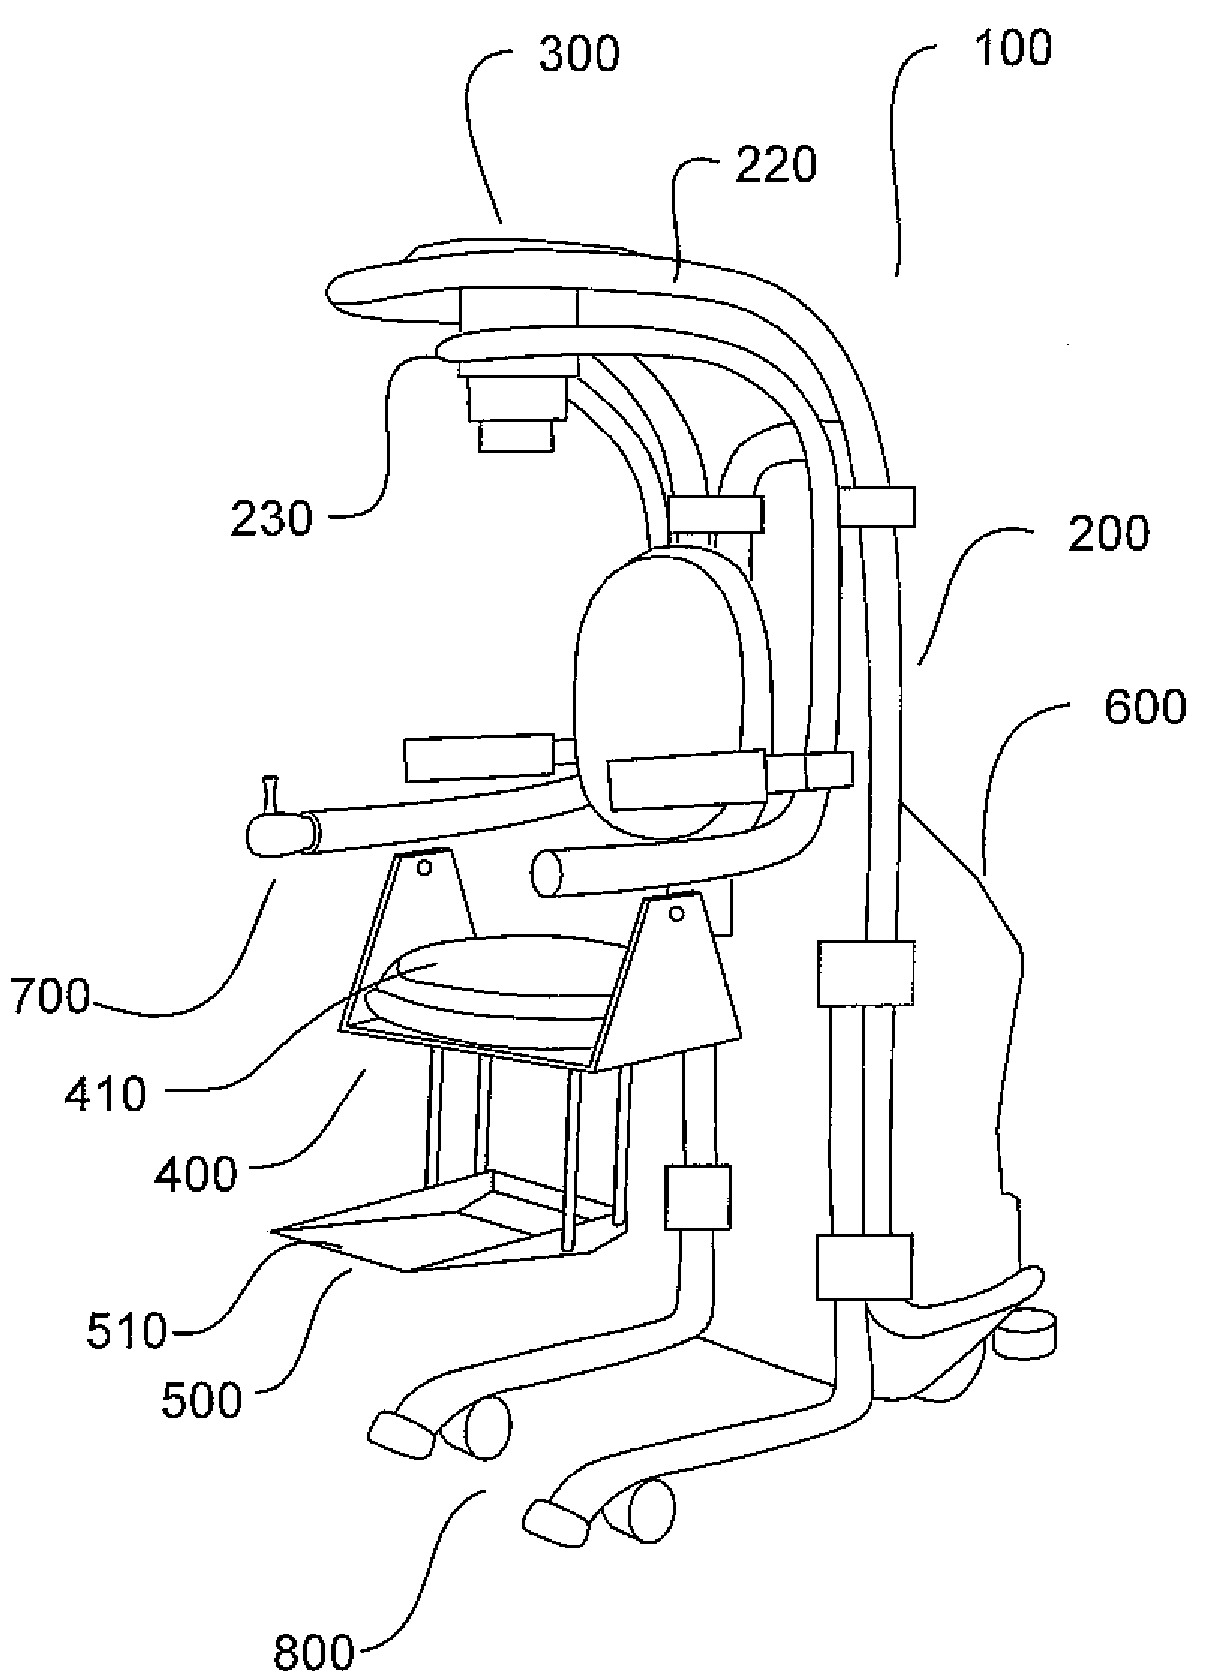 Home Lift Position and Rehabilitation (HLPR) Apparatus